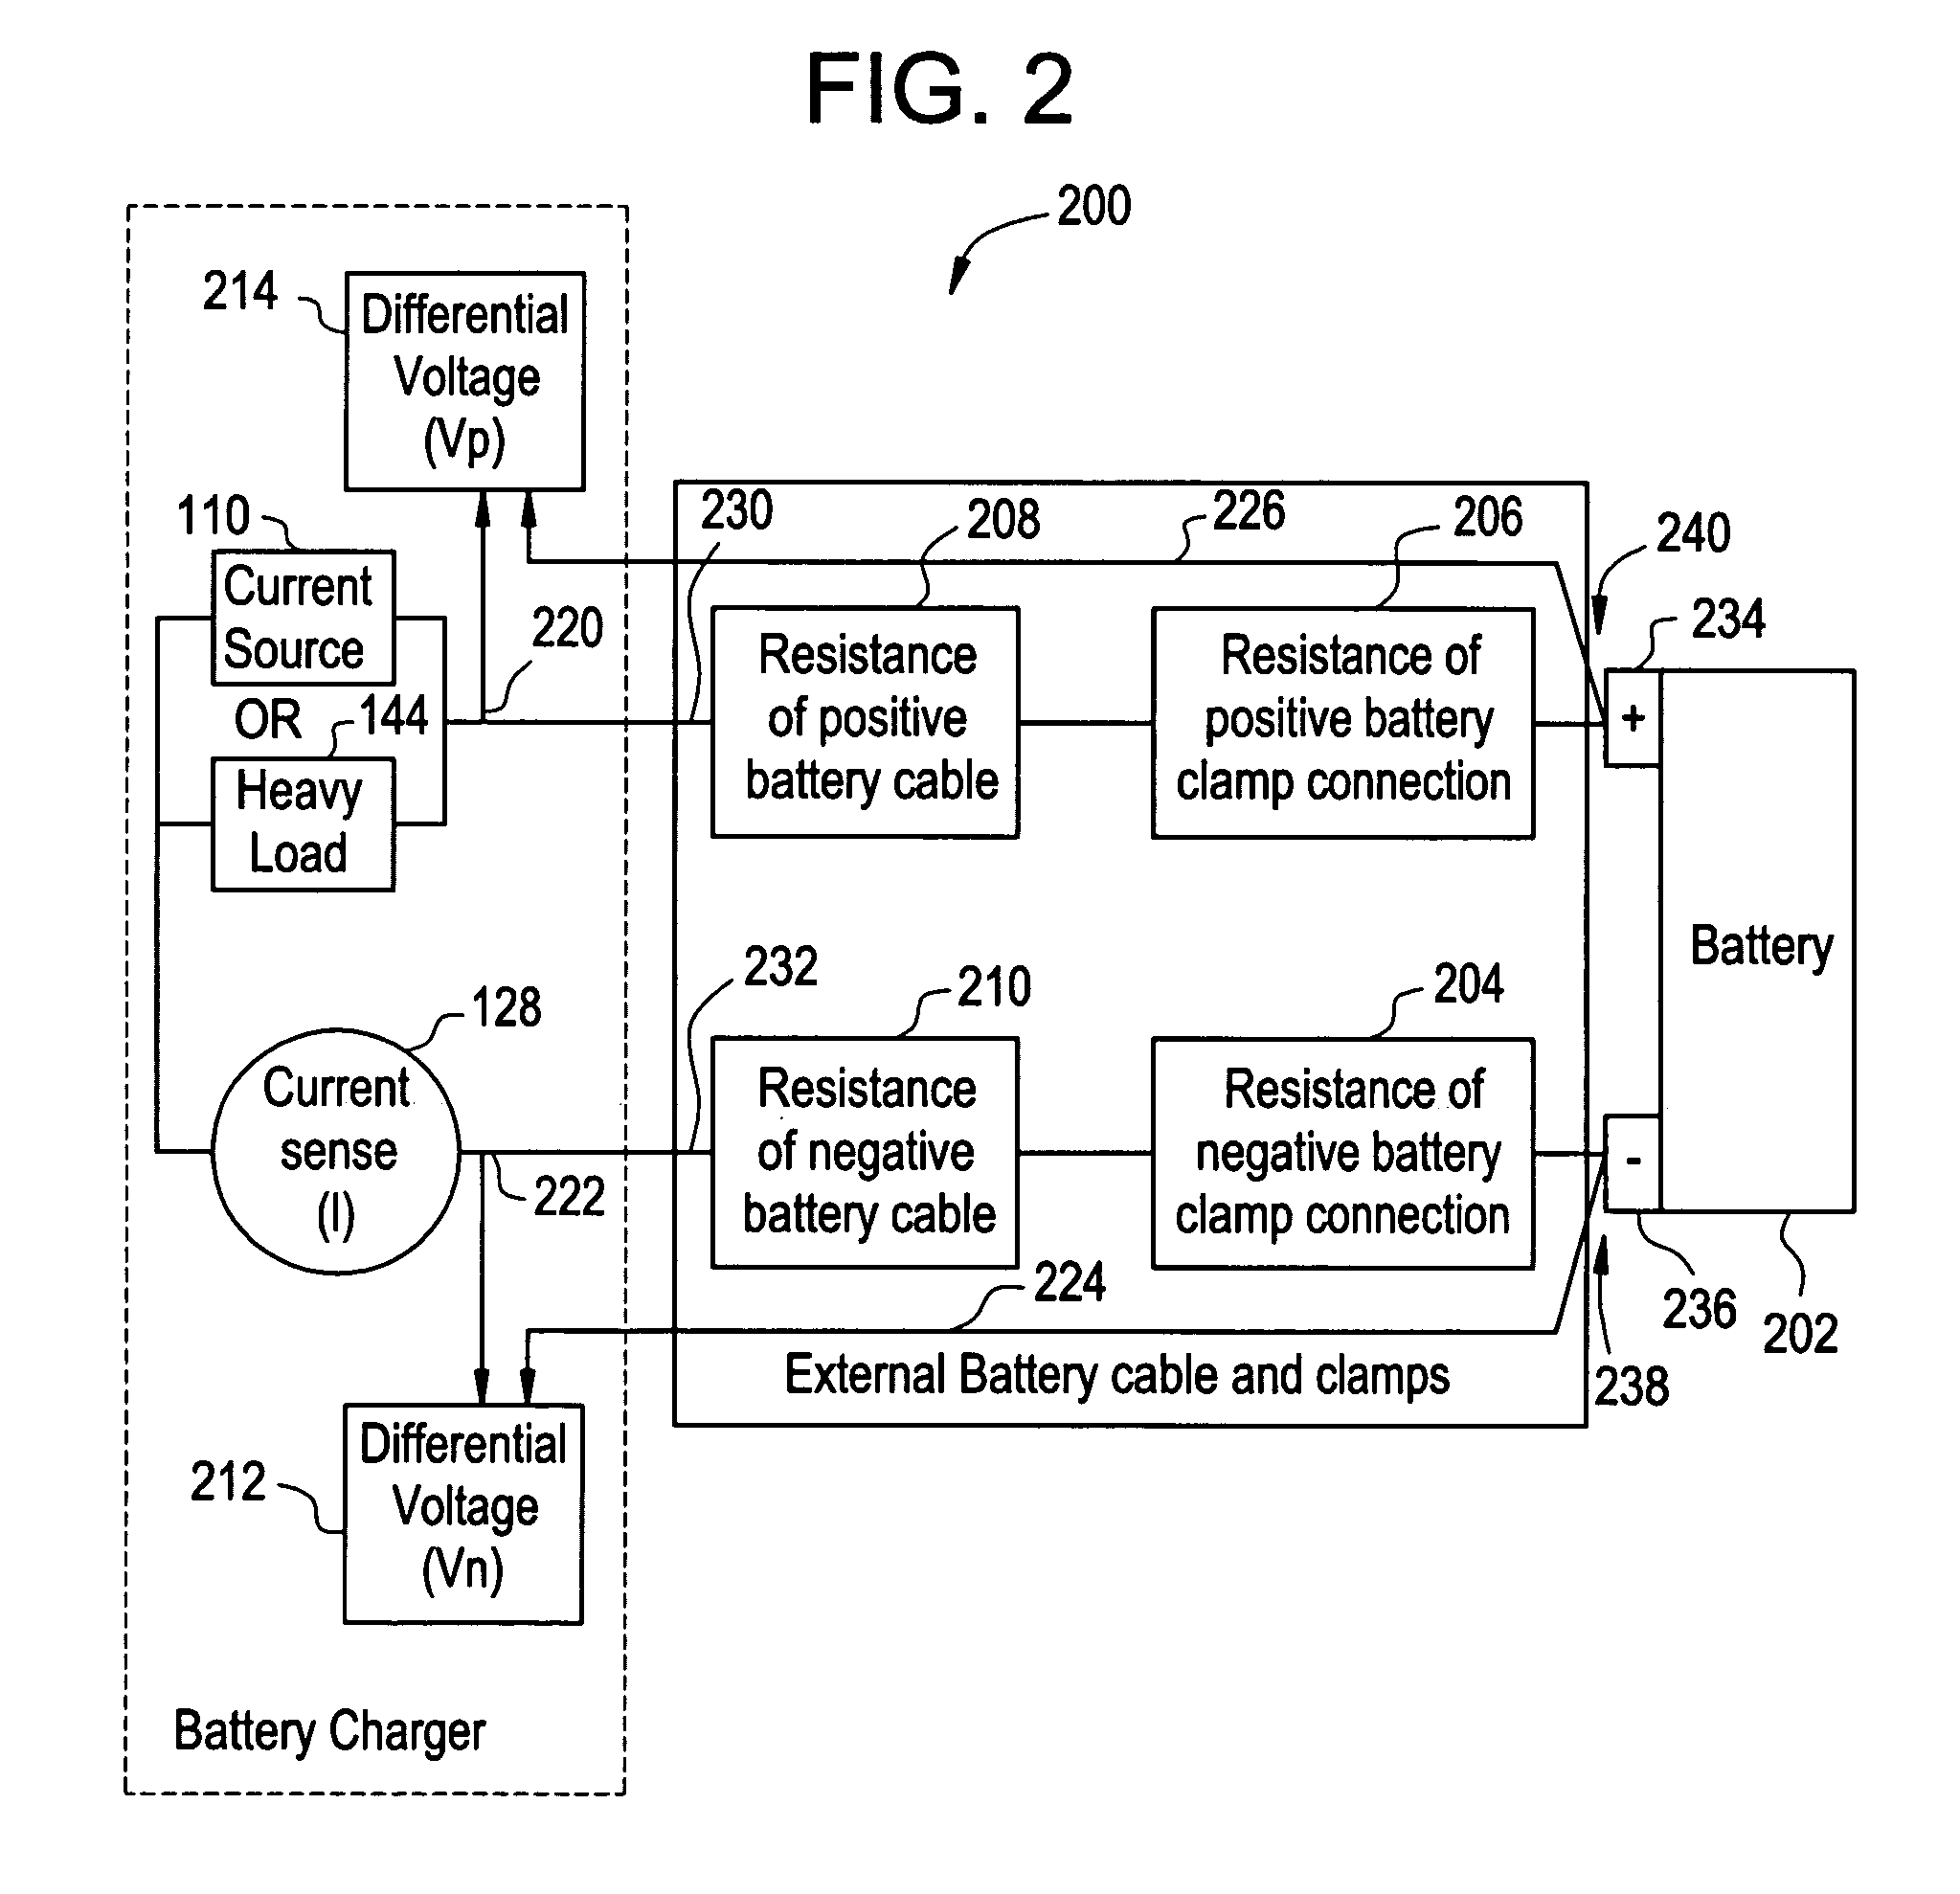 Apparatus and method for determining the temperature of a charging power source